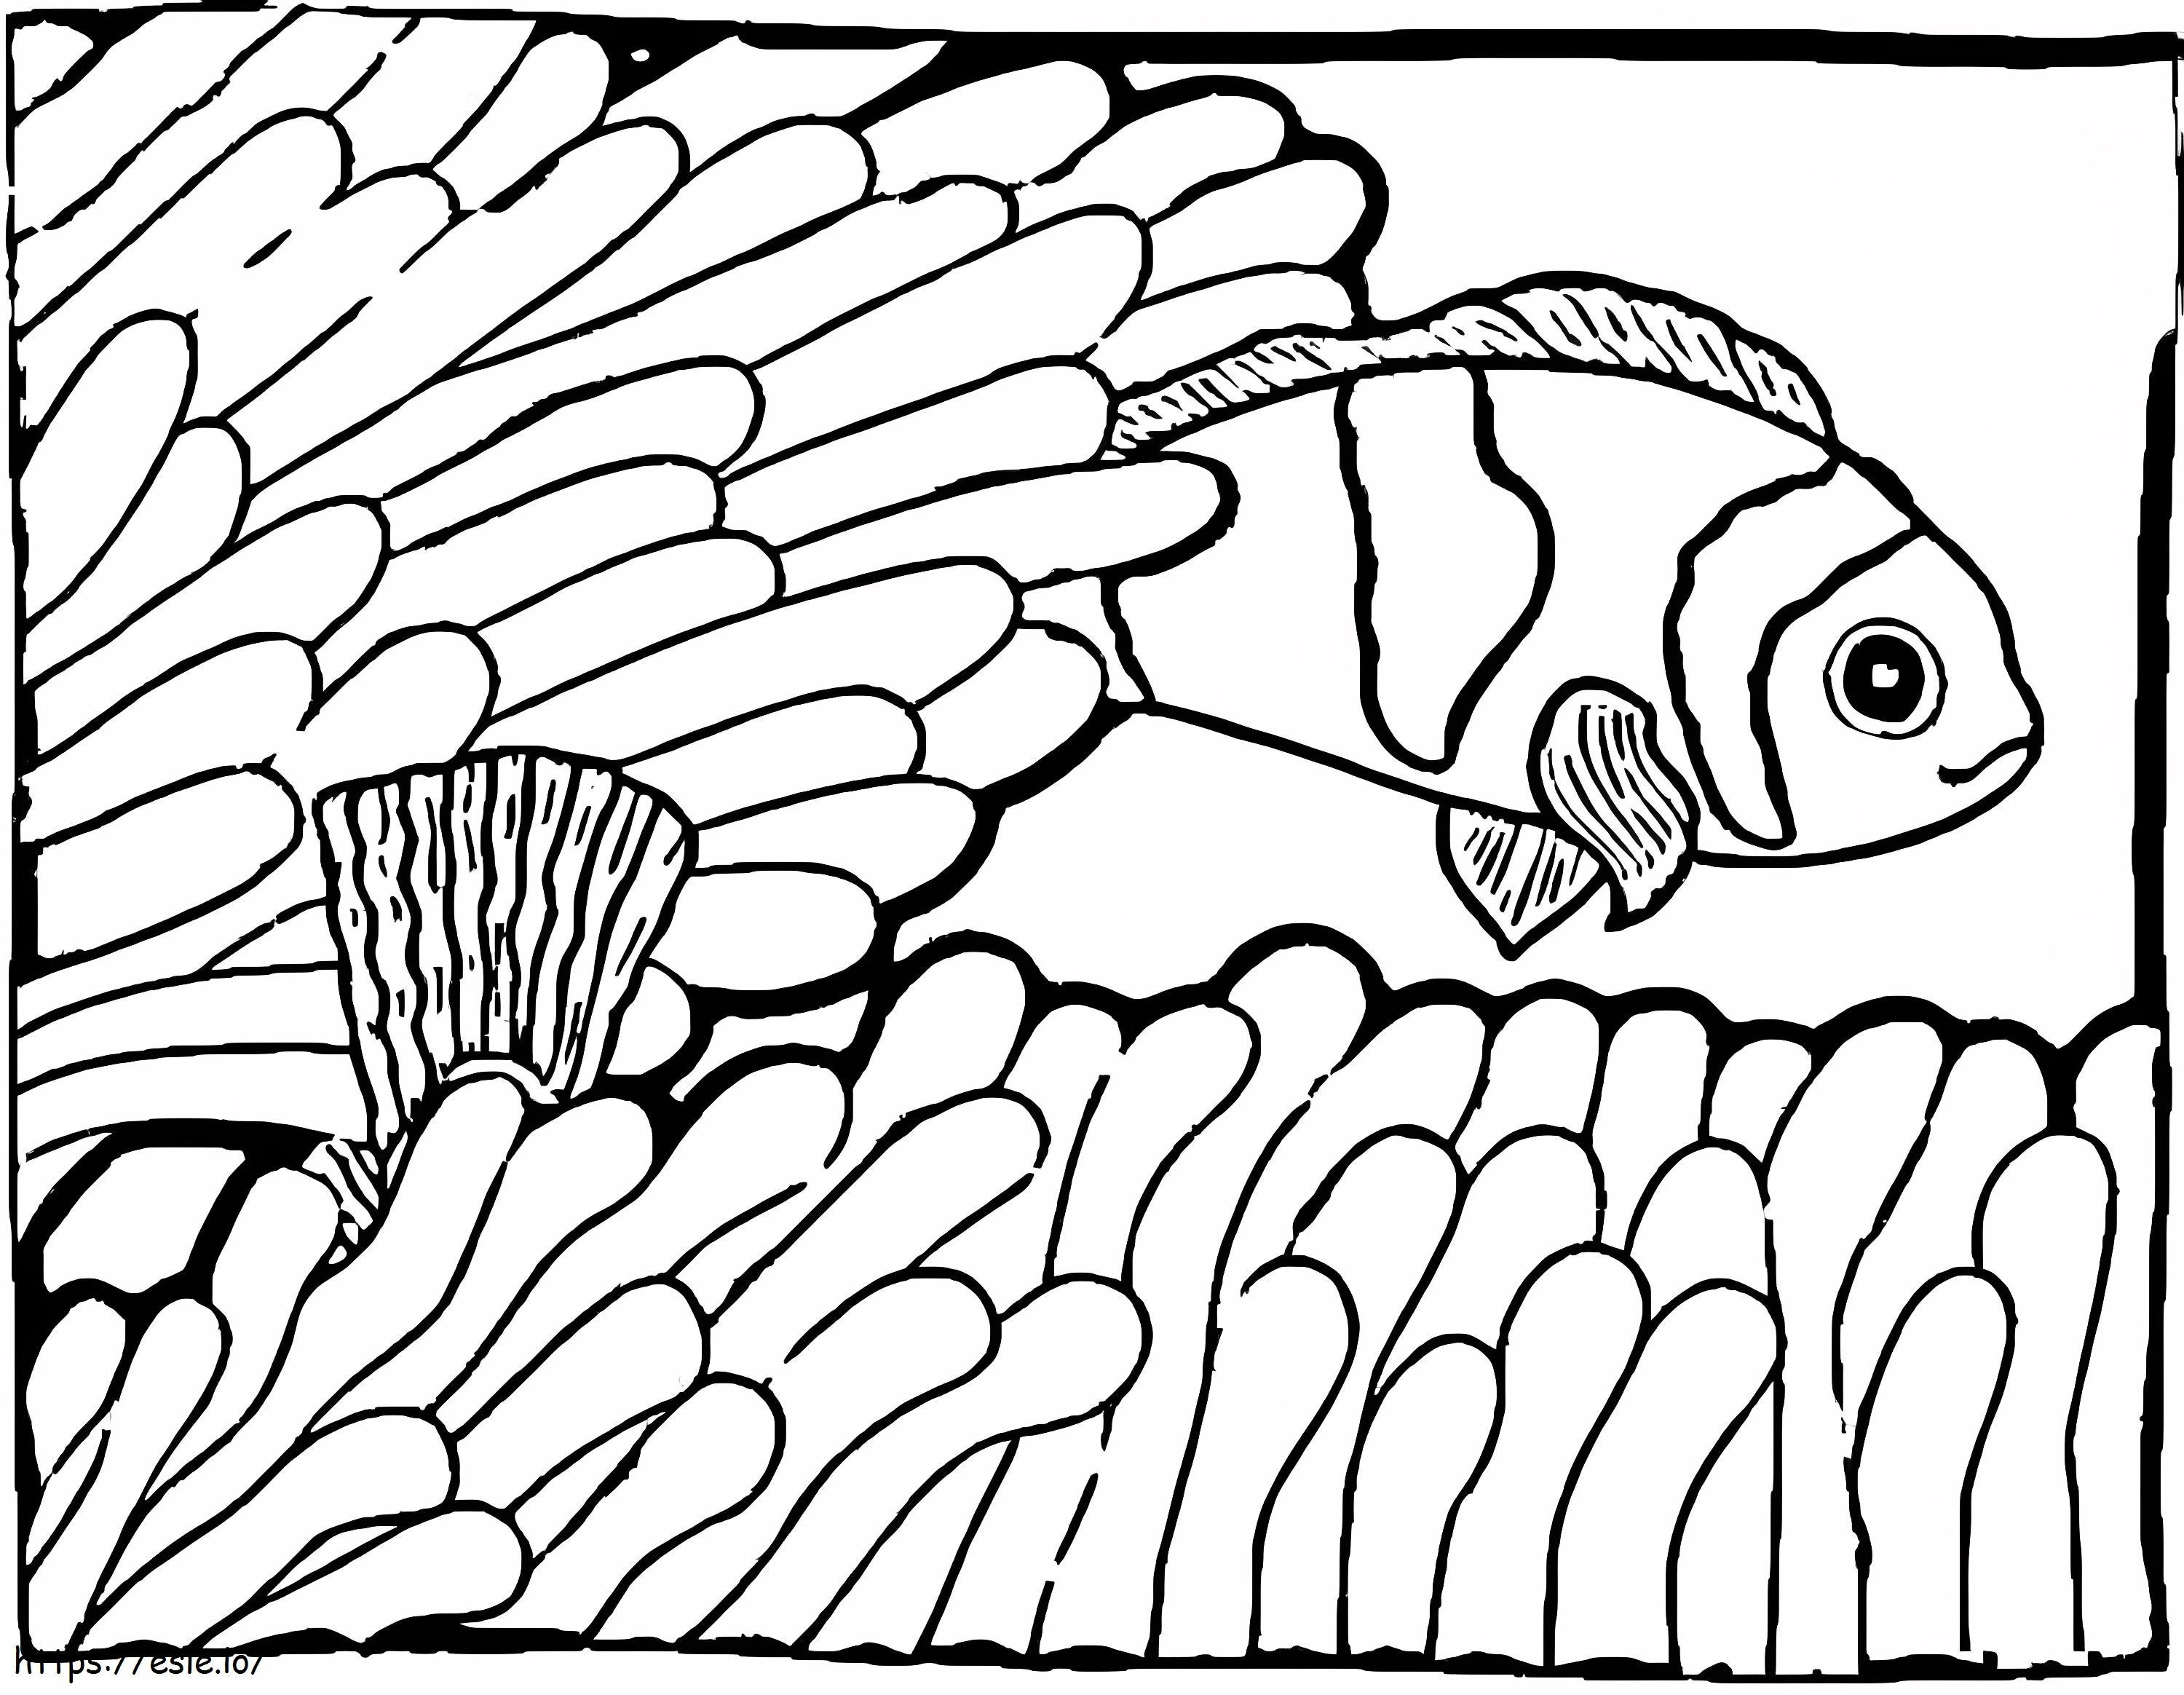 One Clownfish coloring page